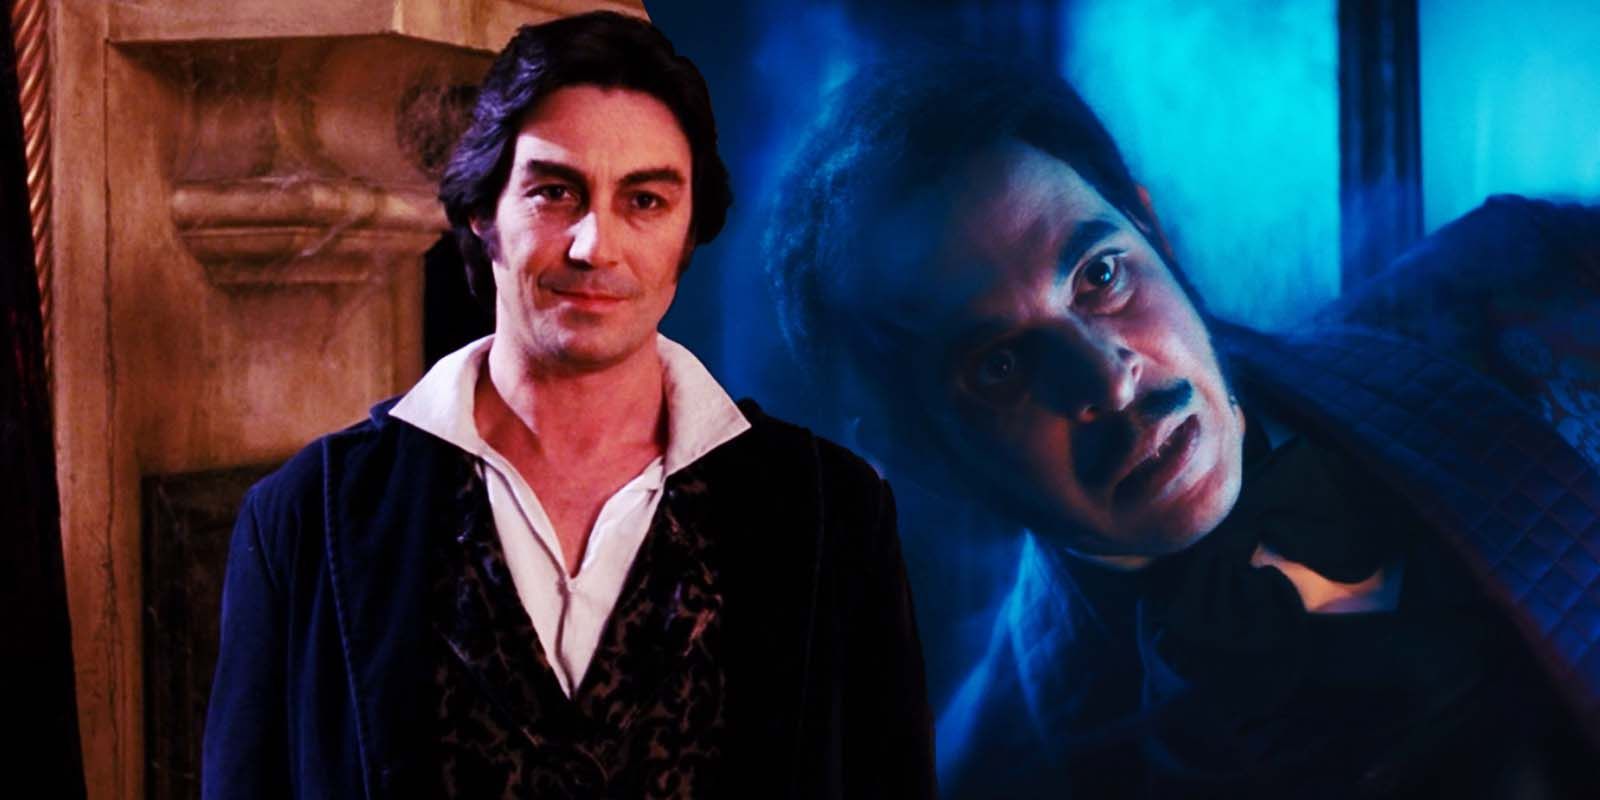 Nathaniel Parker as Master Gracey in 2003's The Haunted Mansion and J.R. Adduci as William Gracey in 2023's Haunted Mansion